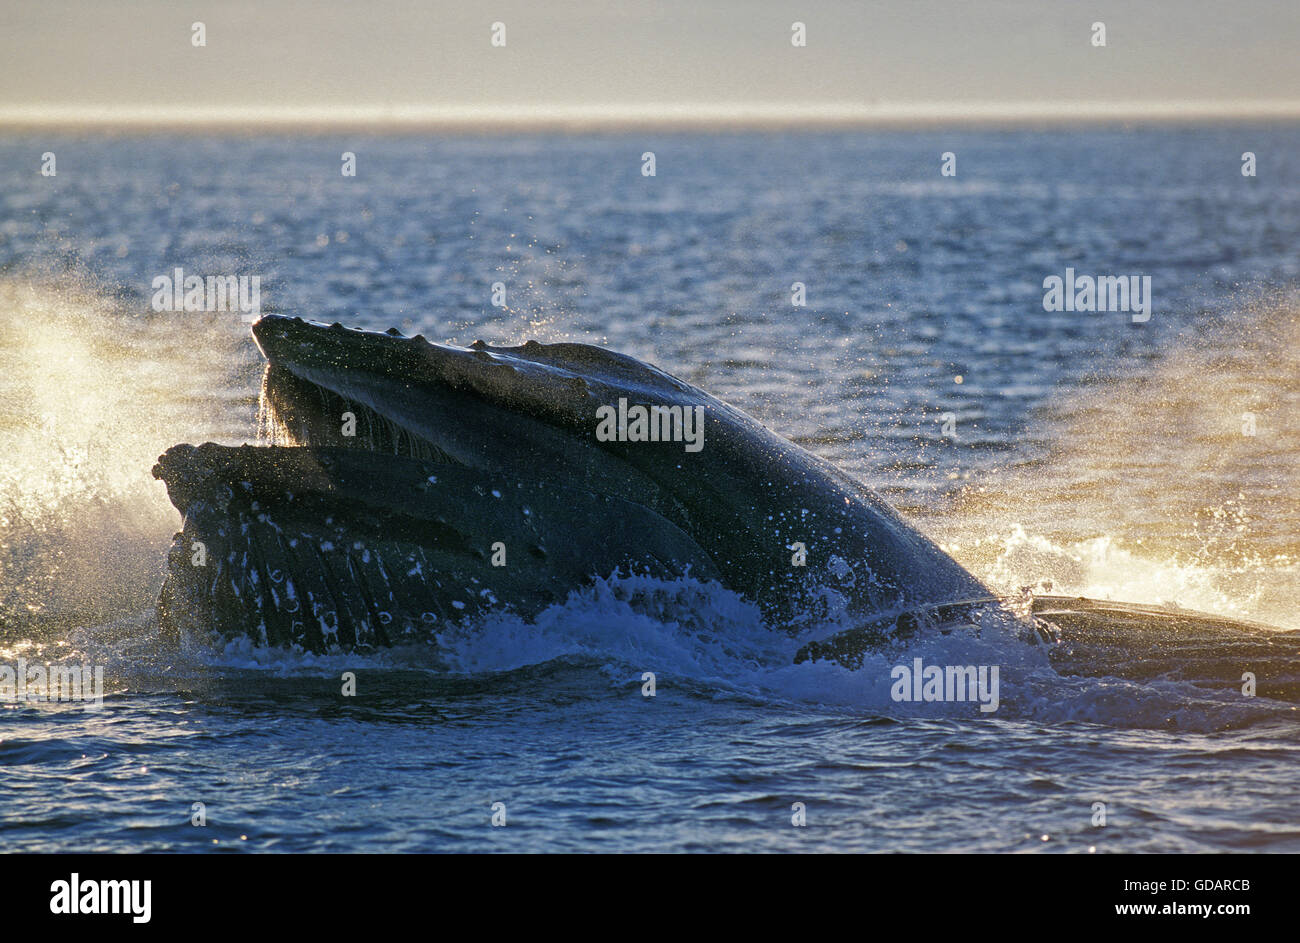 Humpack Whale, megaptera novaeangliae, Adult with Open Mouth to Catch Krill, Alaska Stock Photo